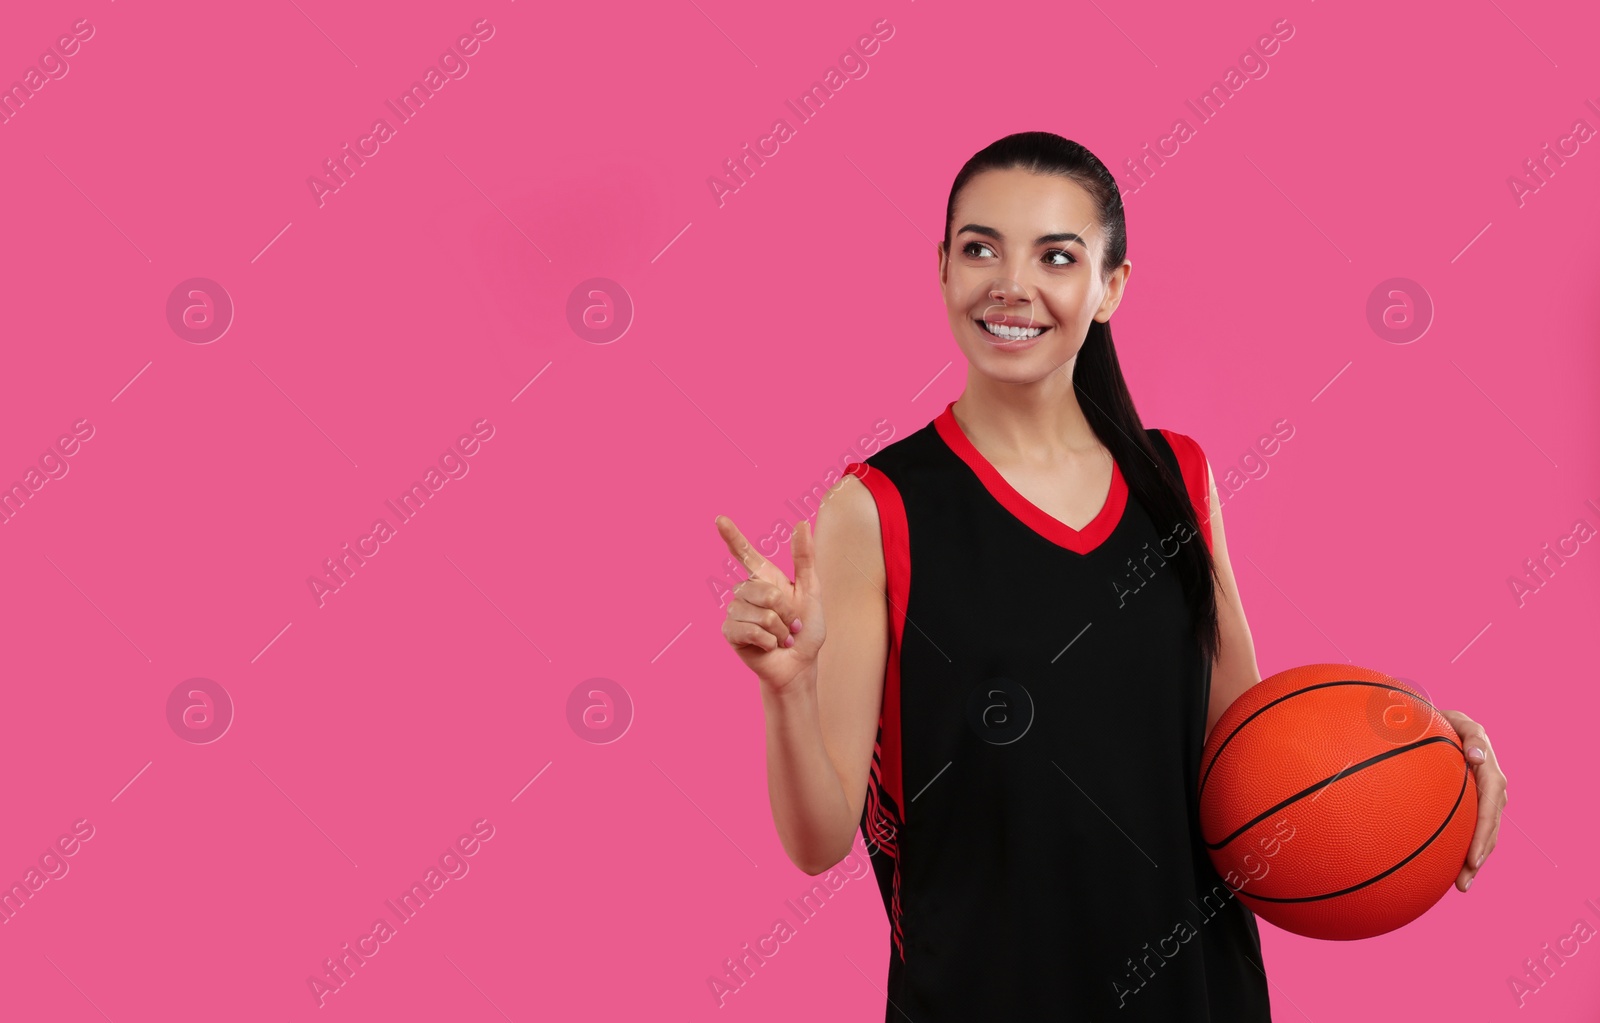 Photo of Basketball player with ball on pink background. Space for text